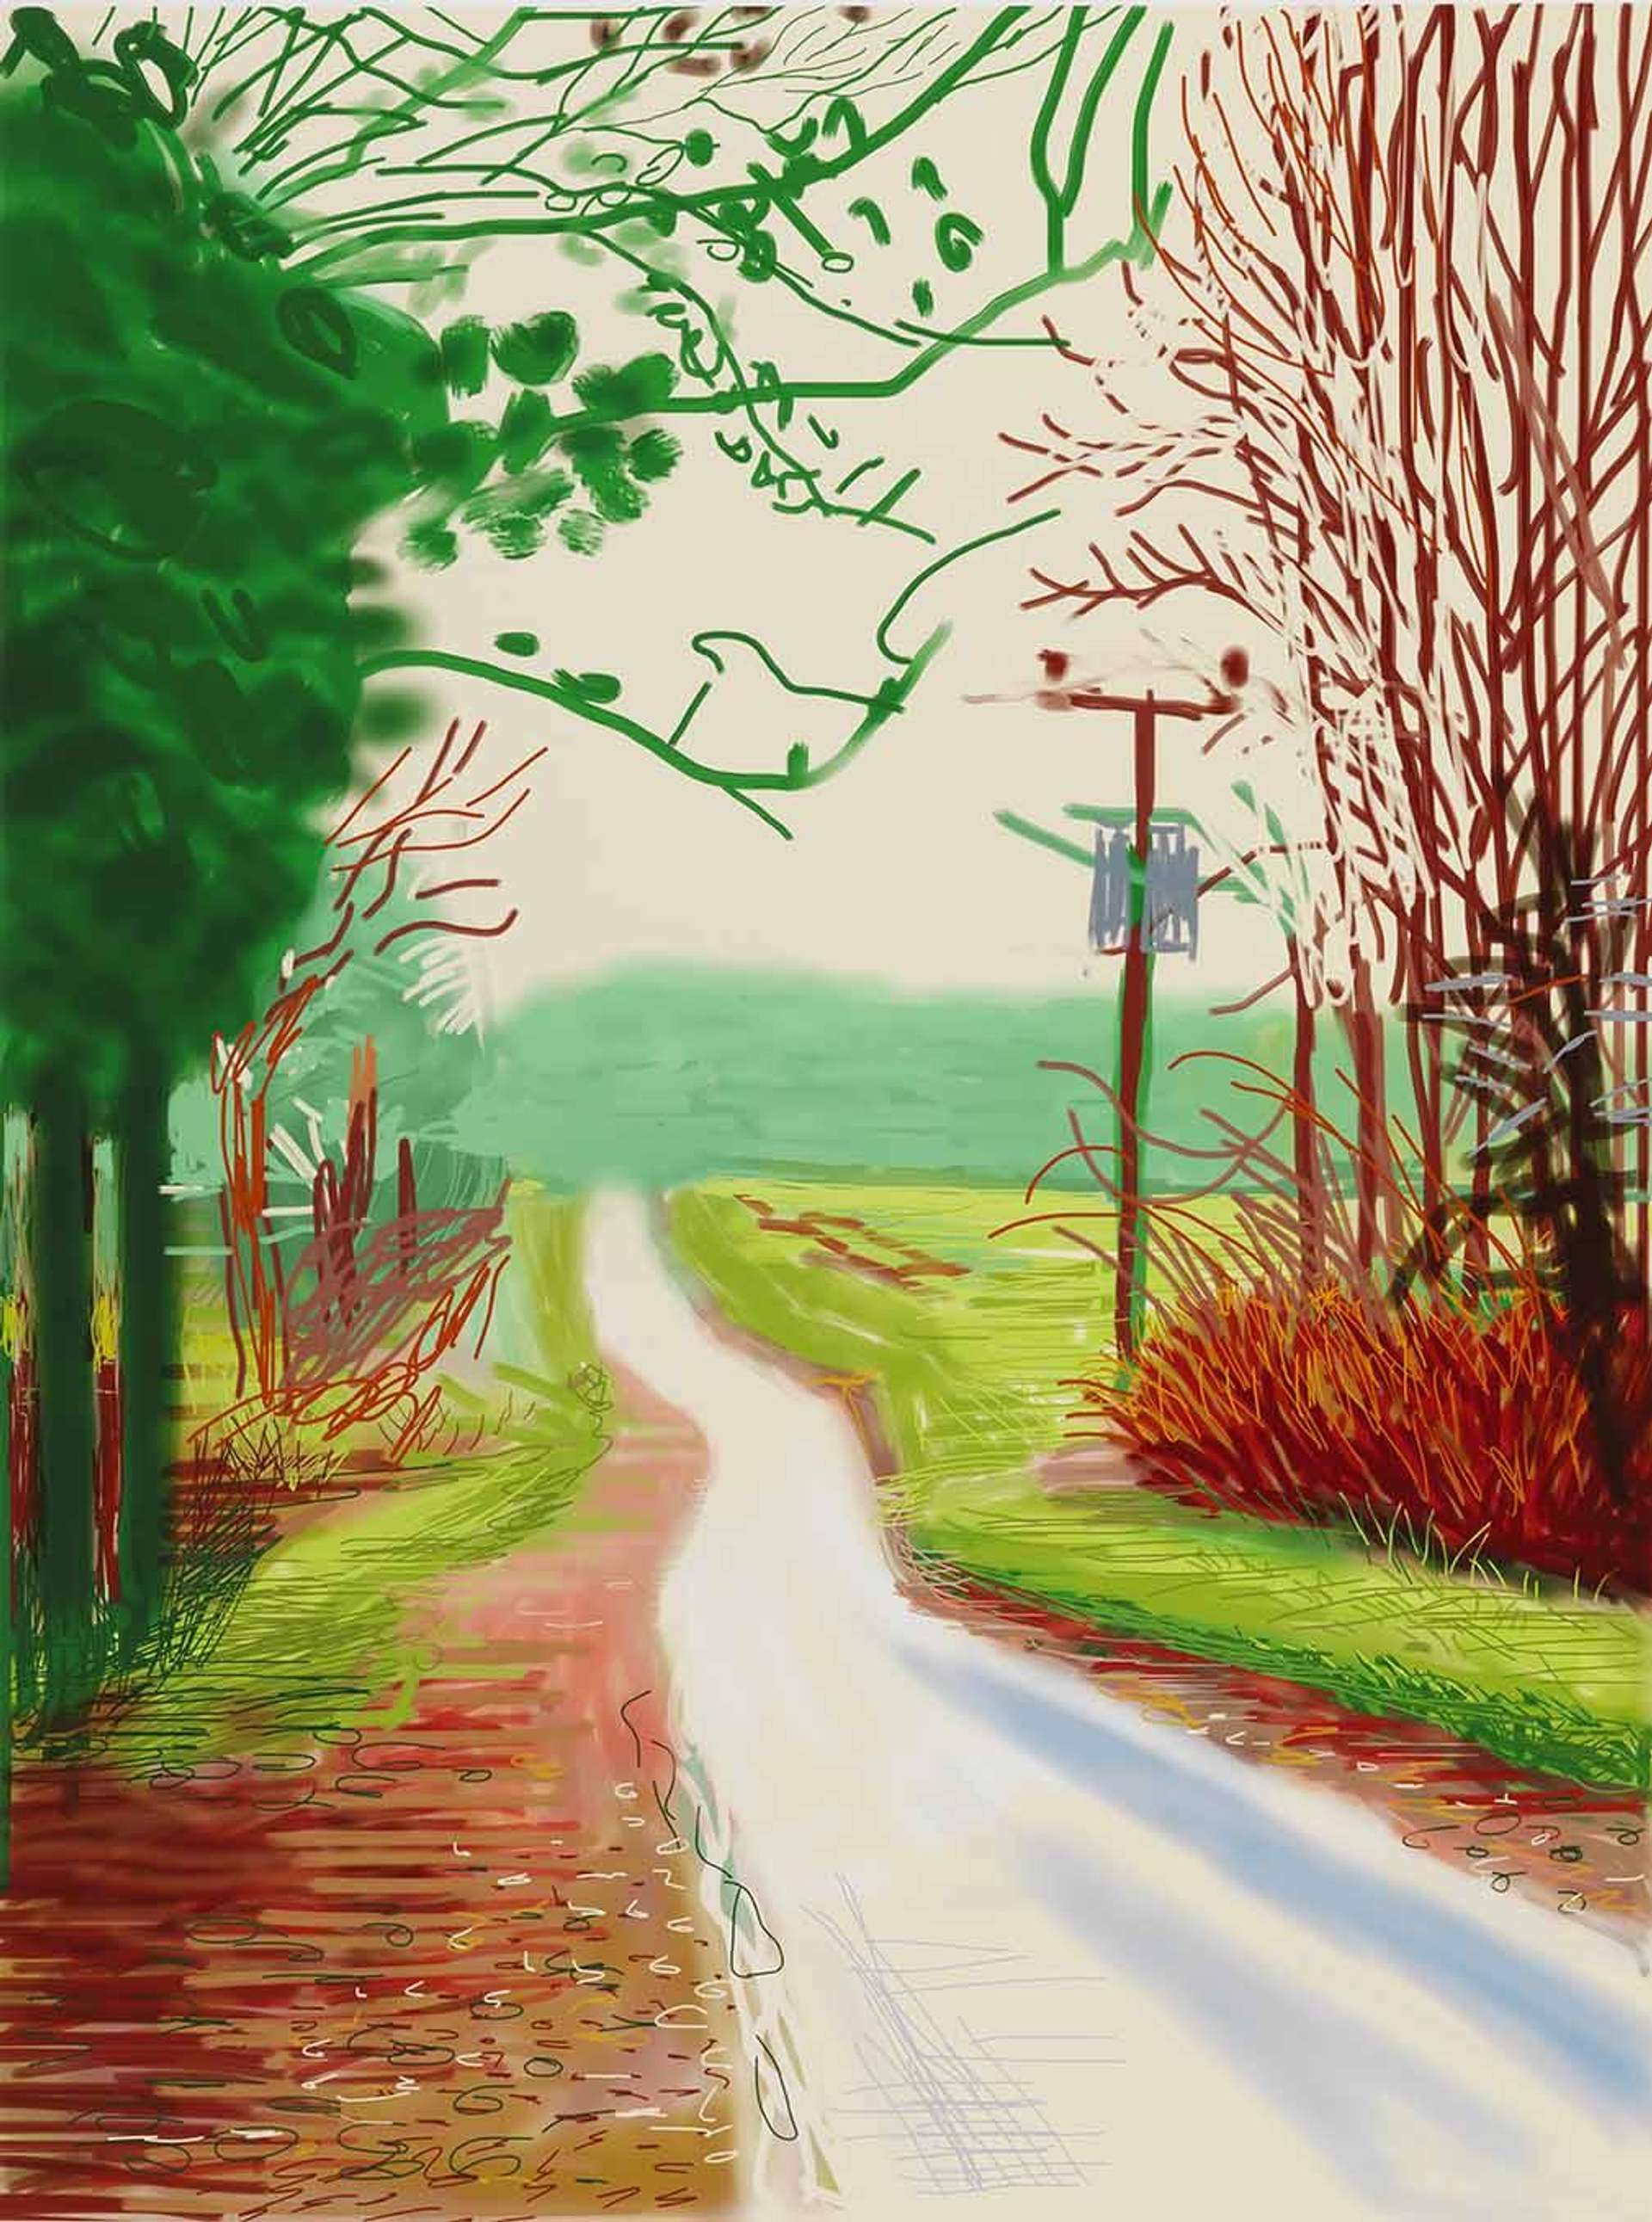 The Arrival Of Spring In Woldgate East Yorkshire 23rd February 2011 - Signed Print by David Hockney 2011 - MyArtBroker